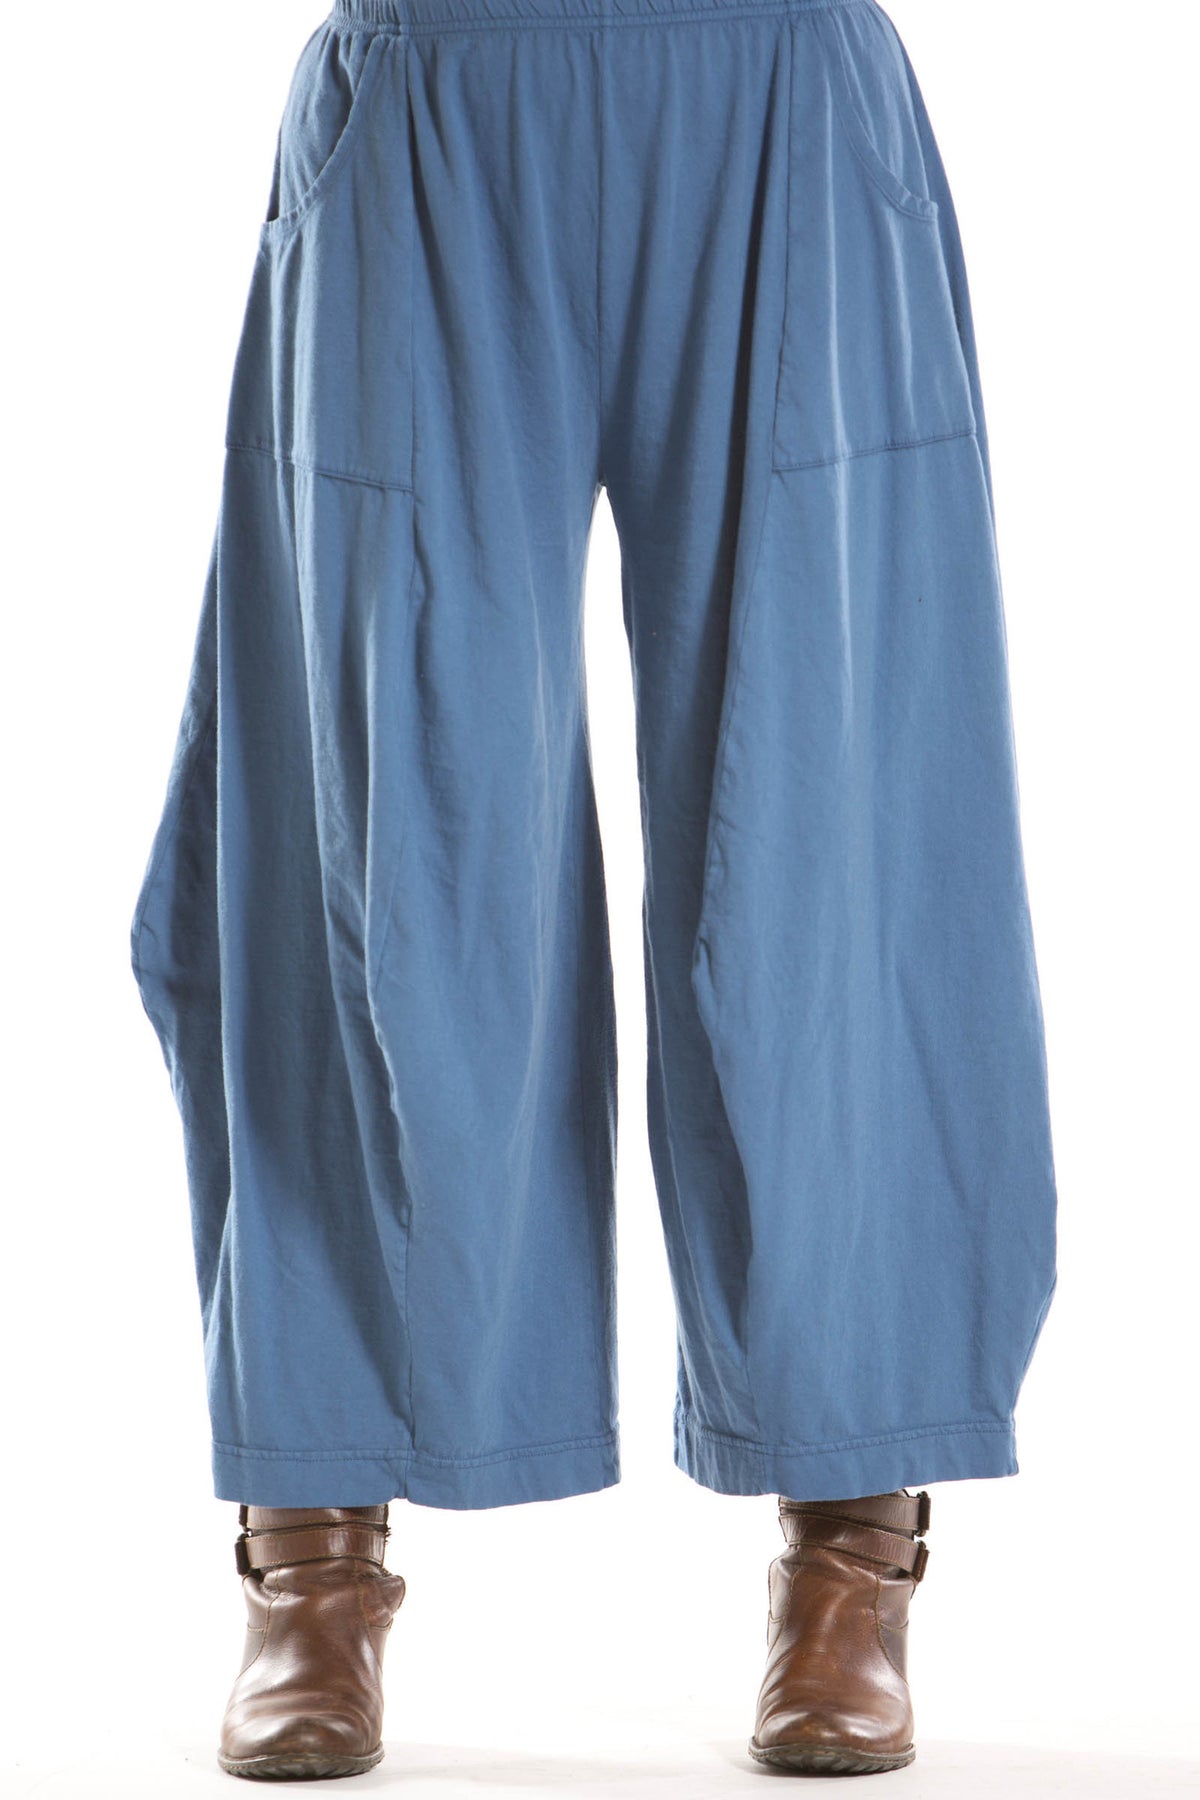 3-D Pant with Pockets UnPrinted-Blue Fish Clothing